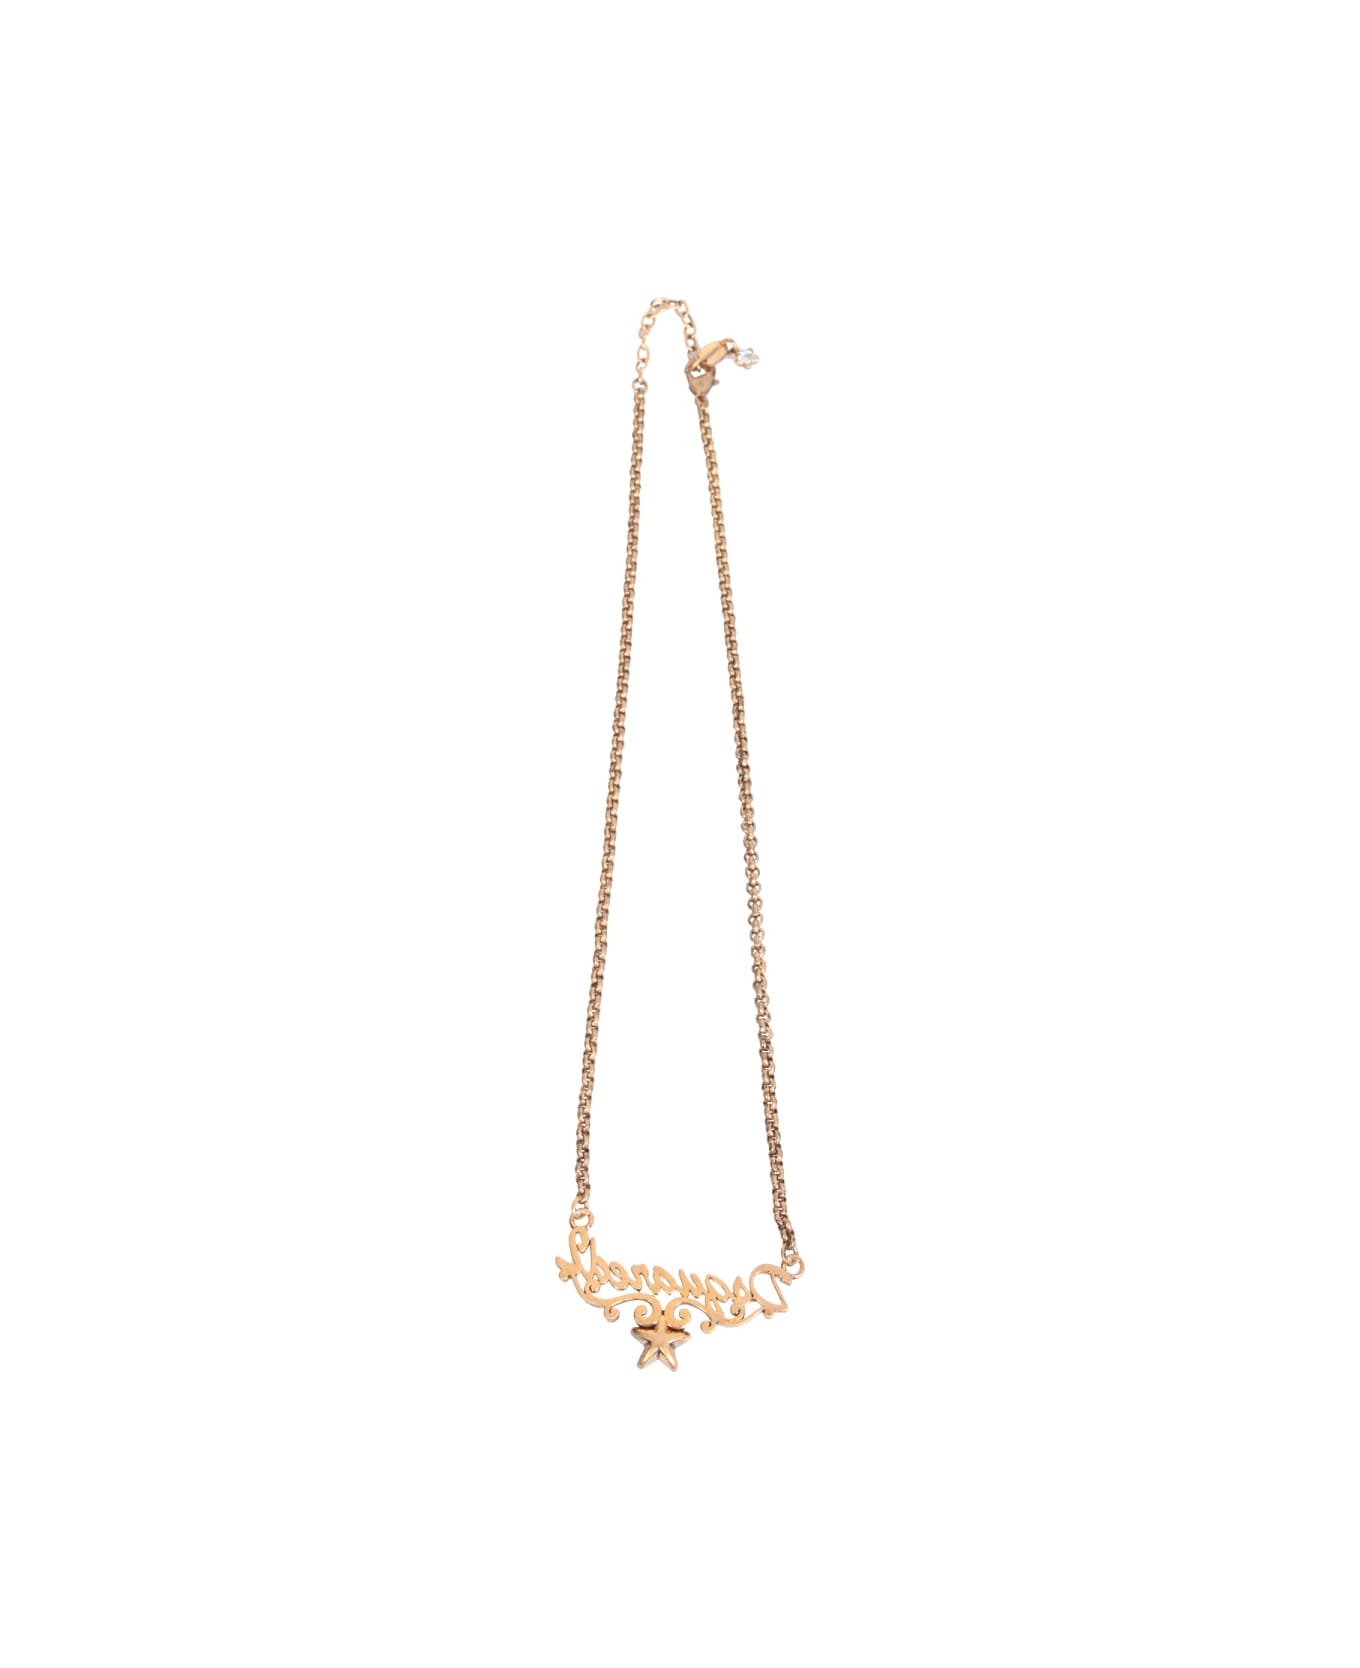 Dsquared2 Twinkle Necklace - GOLD